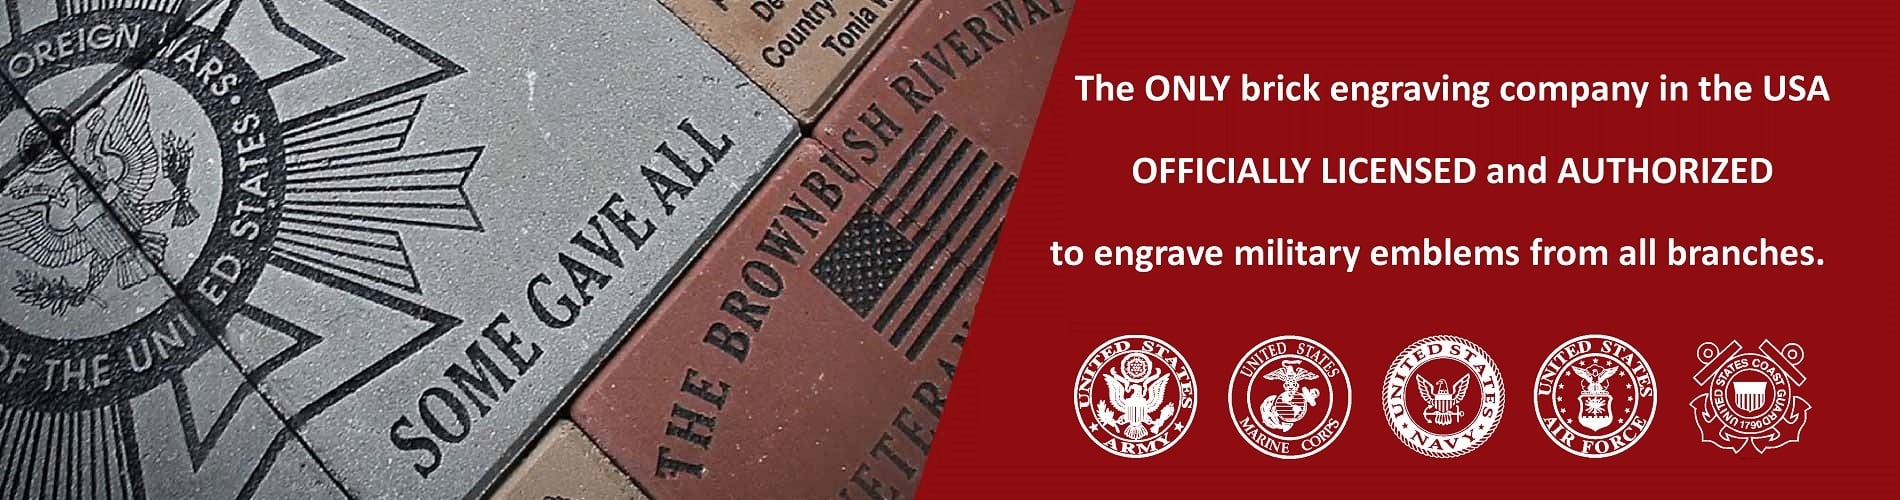 The ONLY brick engraving company in the USA officially licensed and authorized to engrave military emblems from all 6 branches